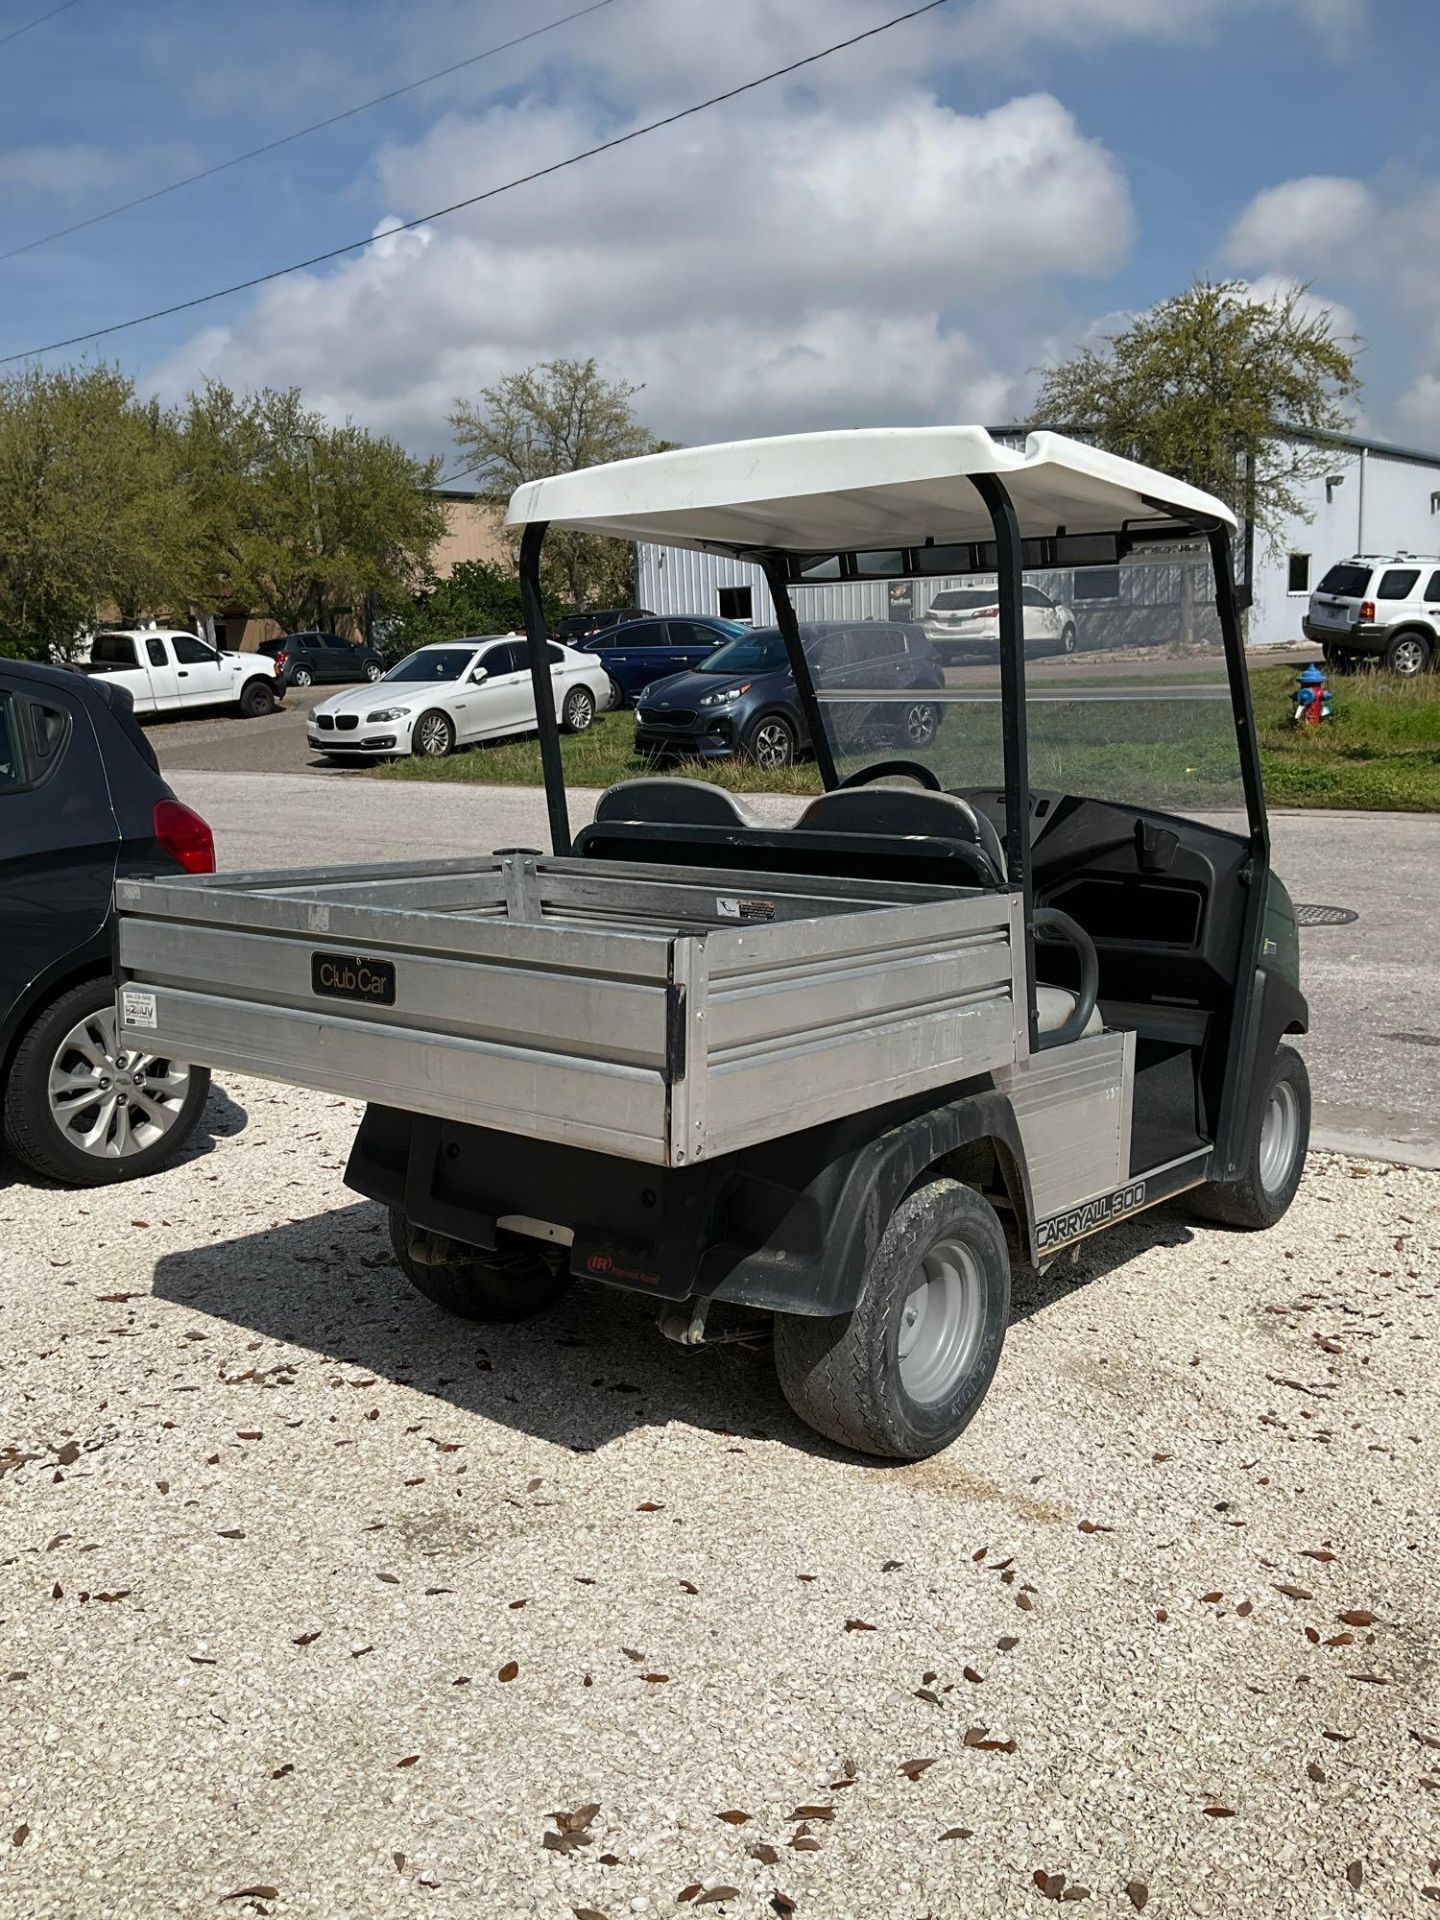 2018 CLUB CAR CARRYALL 300 ATV MODEL CA300 , ELECTRIC , MANUEL DUMP BED, BATTERY CHARGER INCLUDED... - Image 3 of 13